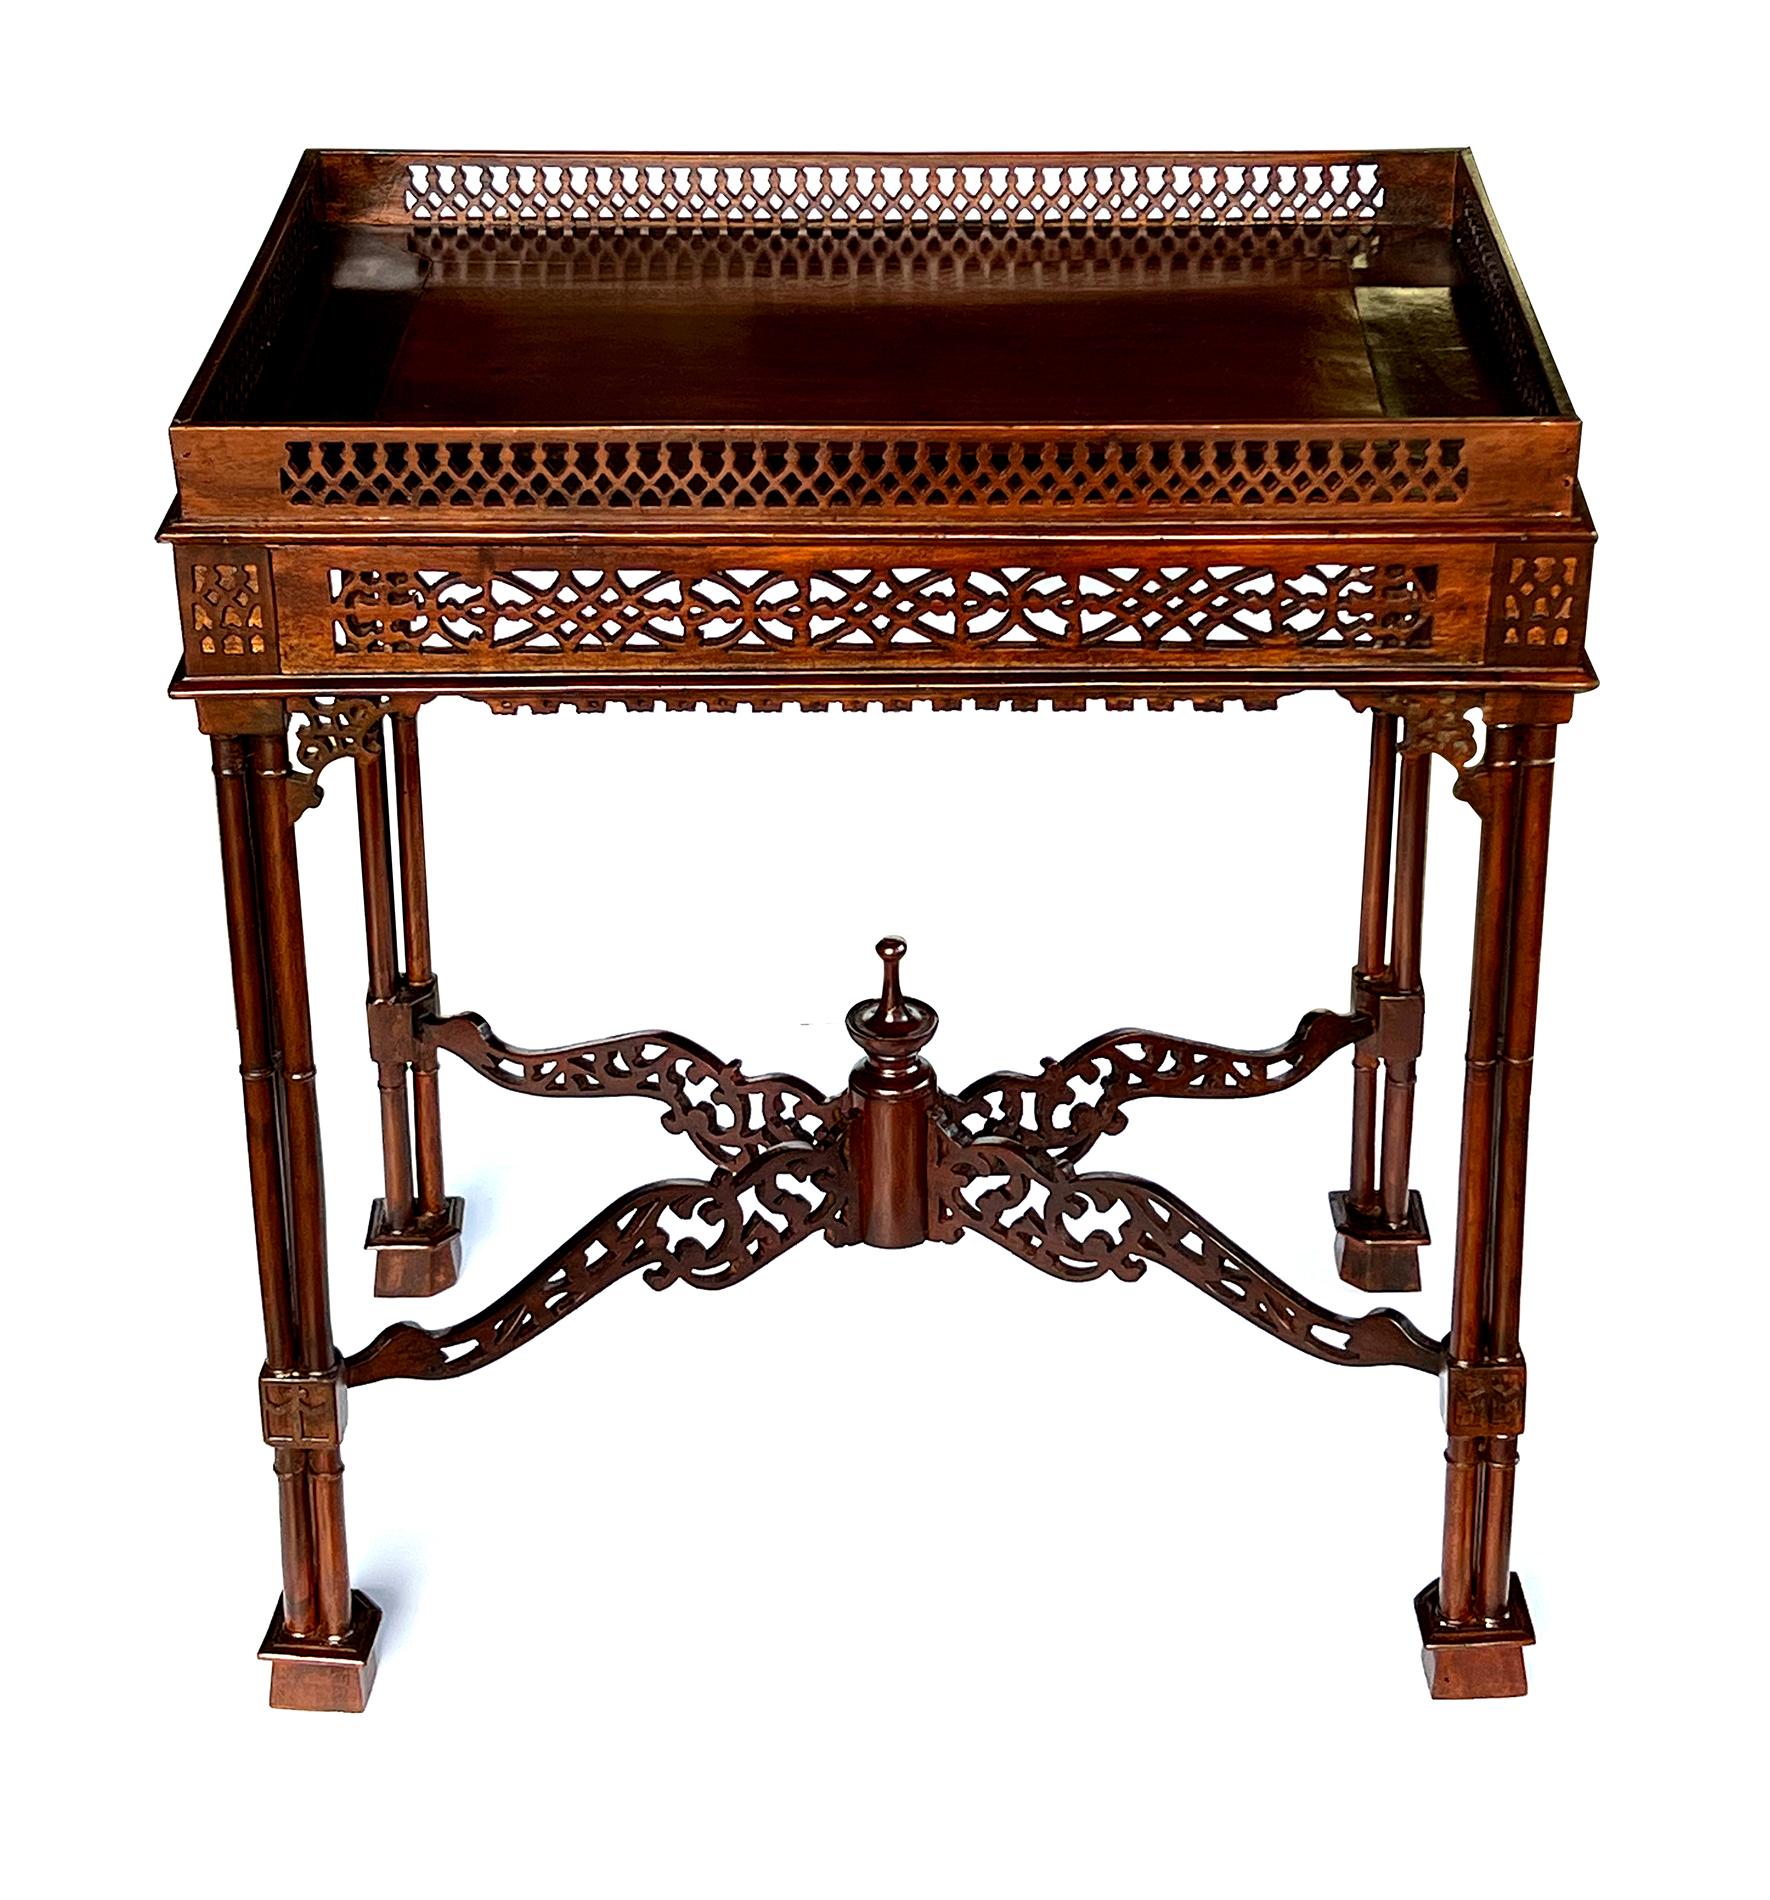 the rectangular top with pierced gallery and apron all raised on cluster column legs joined by an X-form fretwork stretcher centering an urn